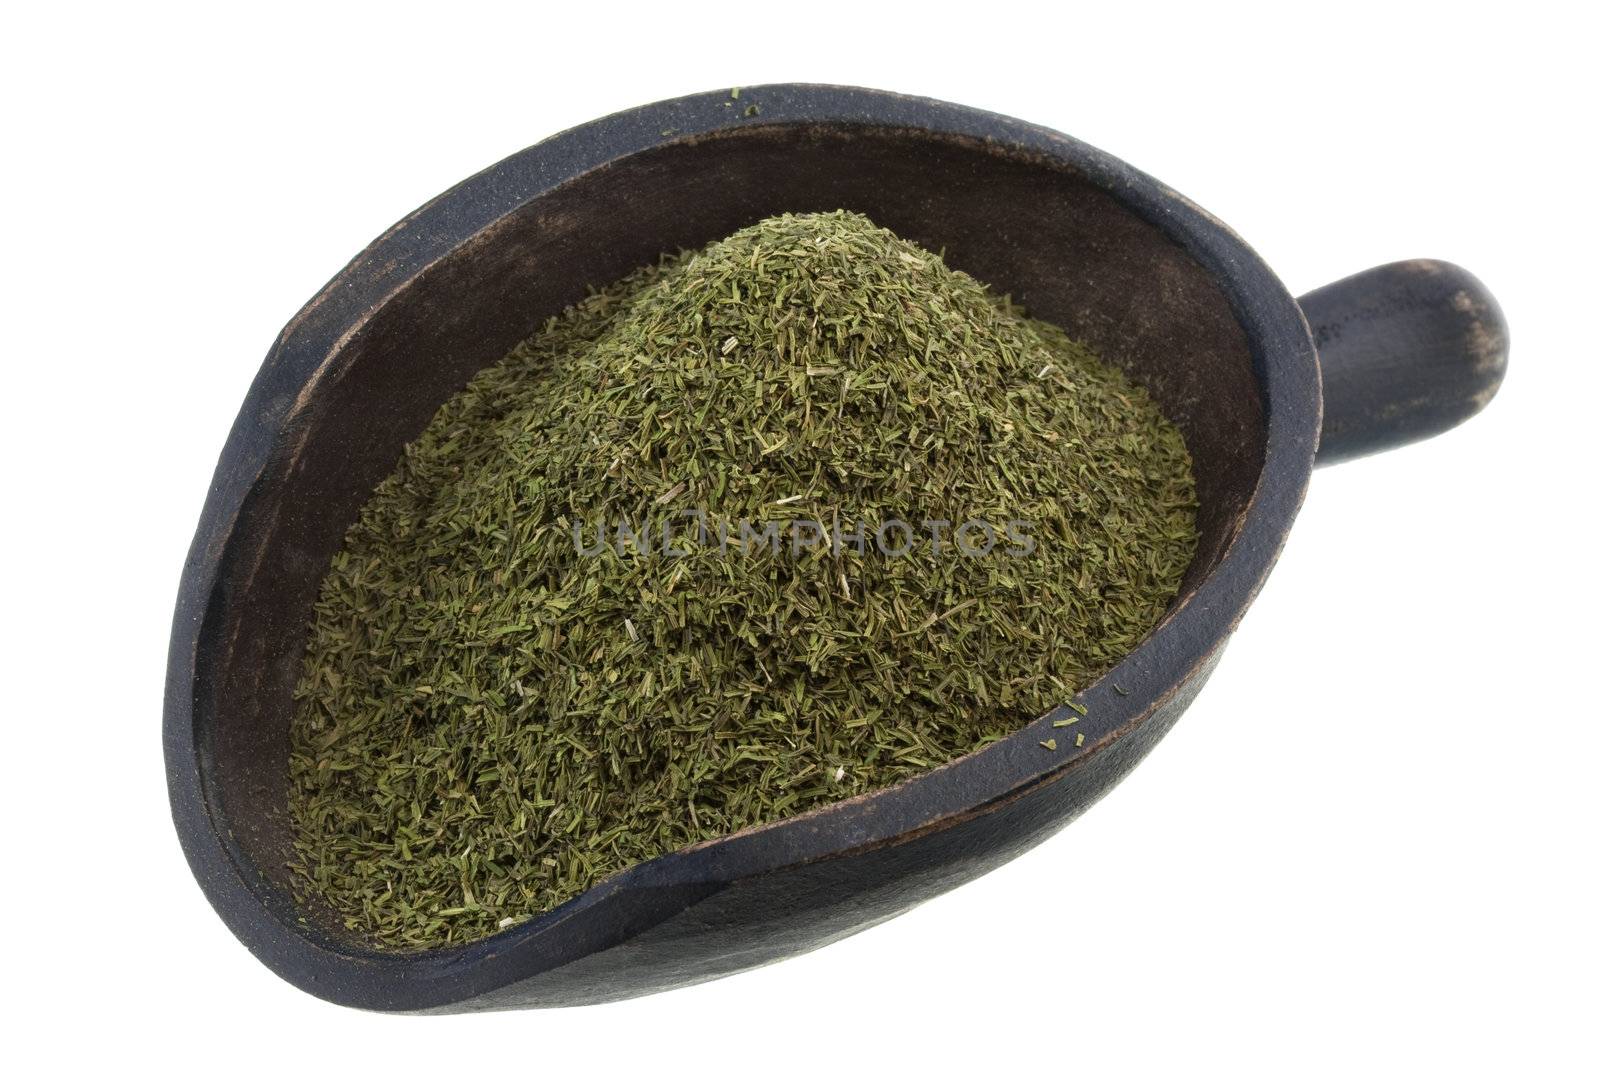 dried dill weed on a rustic wooden scoop isolated on white